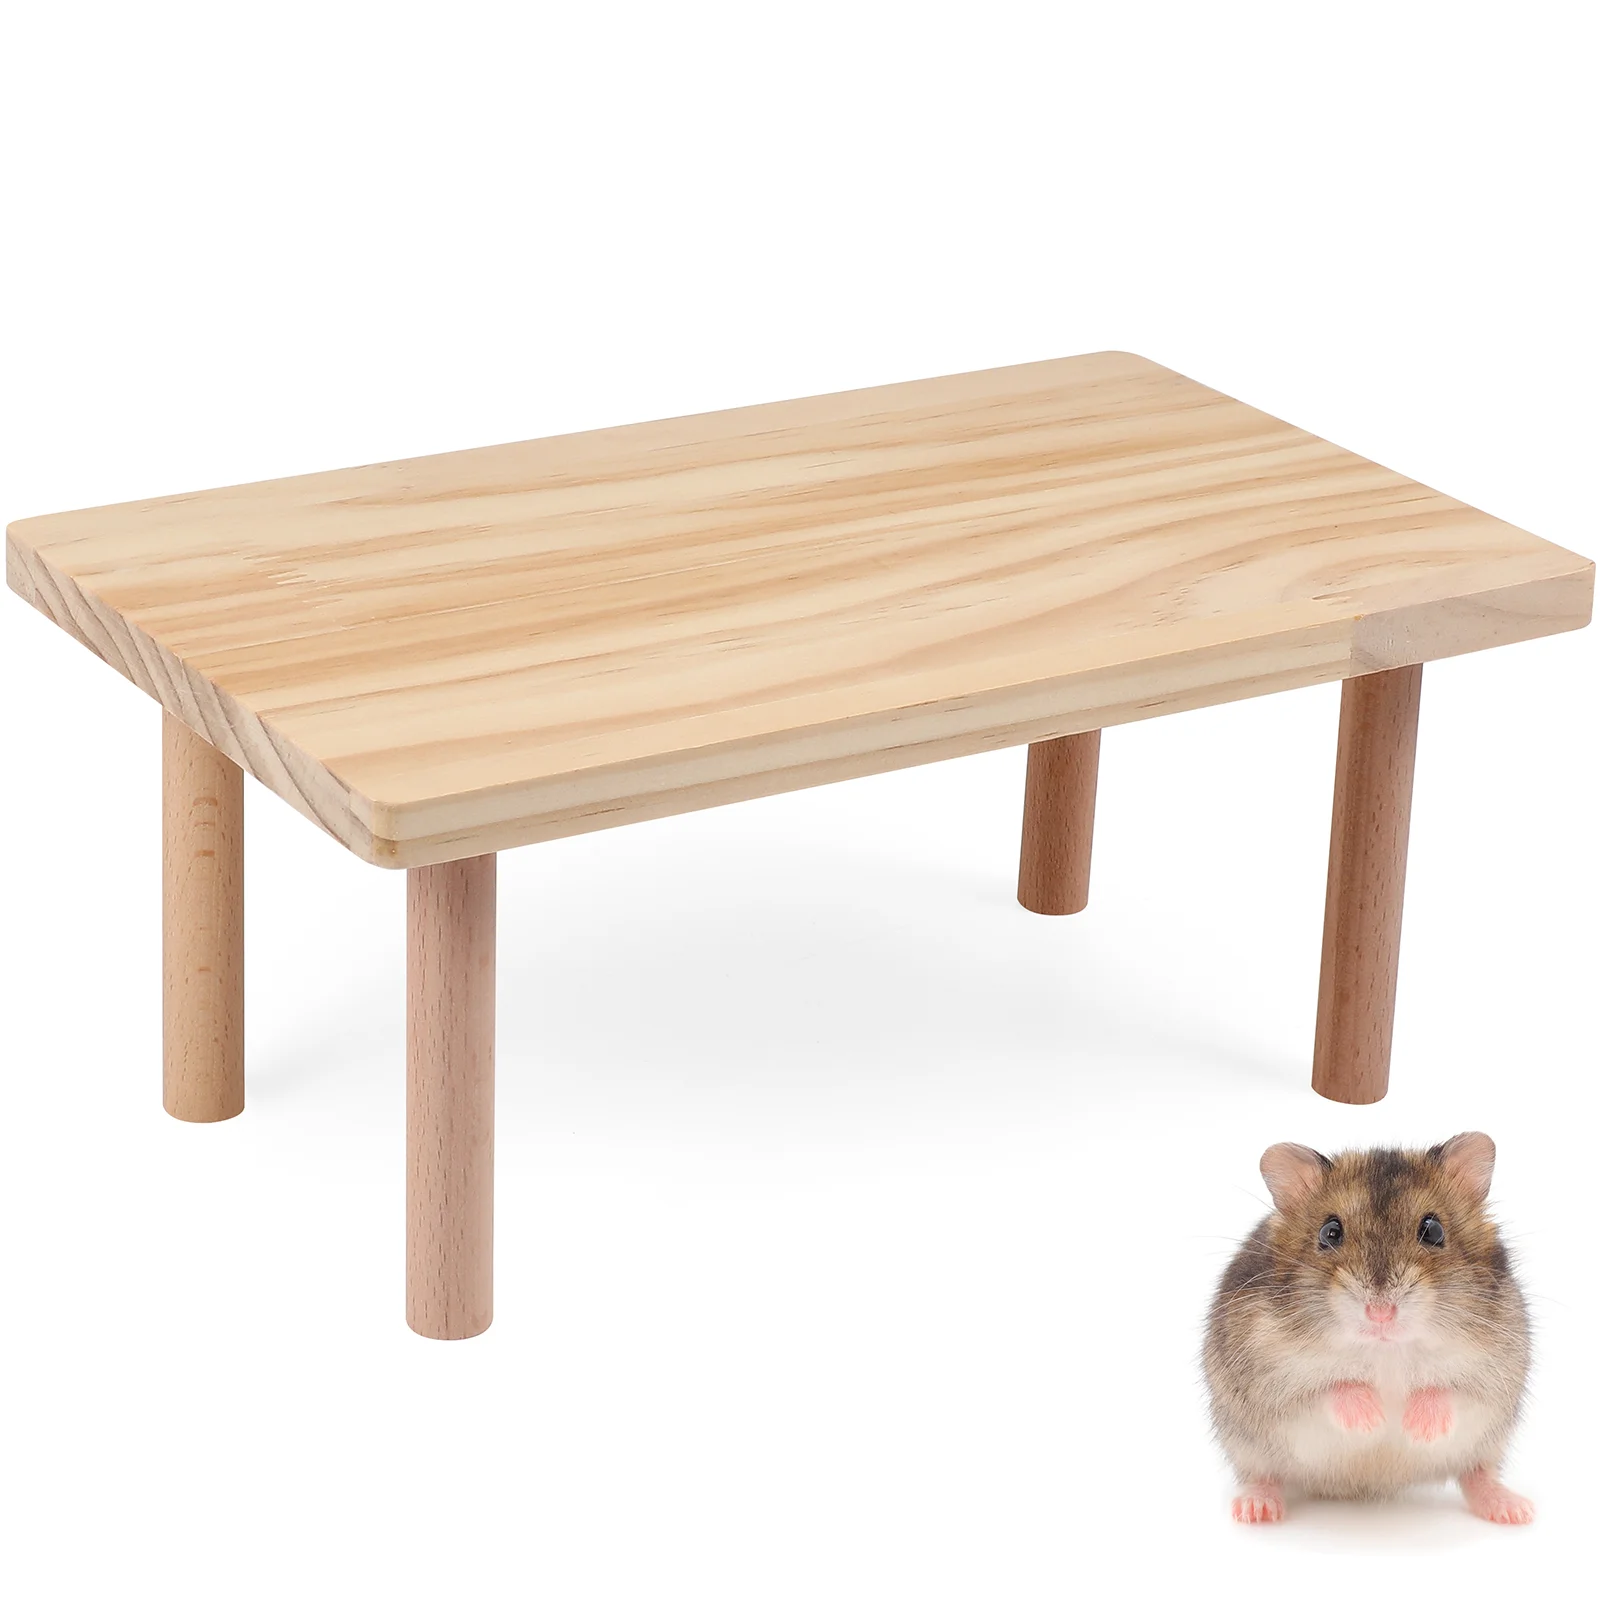 

Hamster Play Wooden Platform Small Pet Playing Stand Putting Food Bowl Water Table Cage Accessory